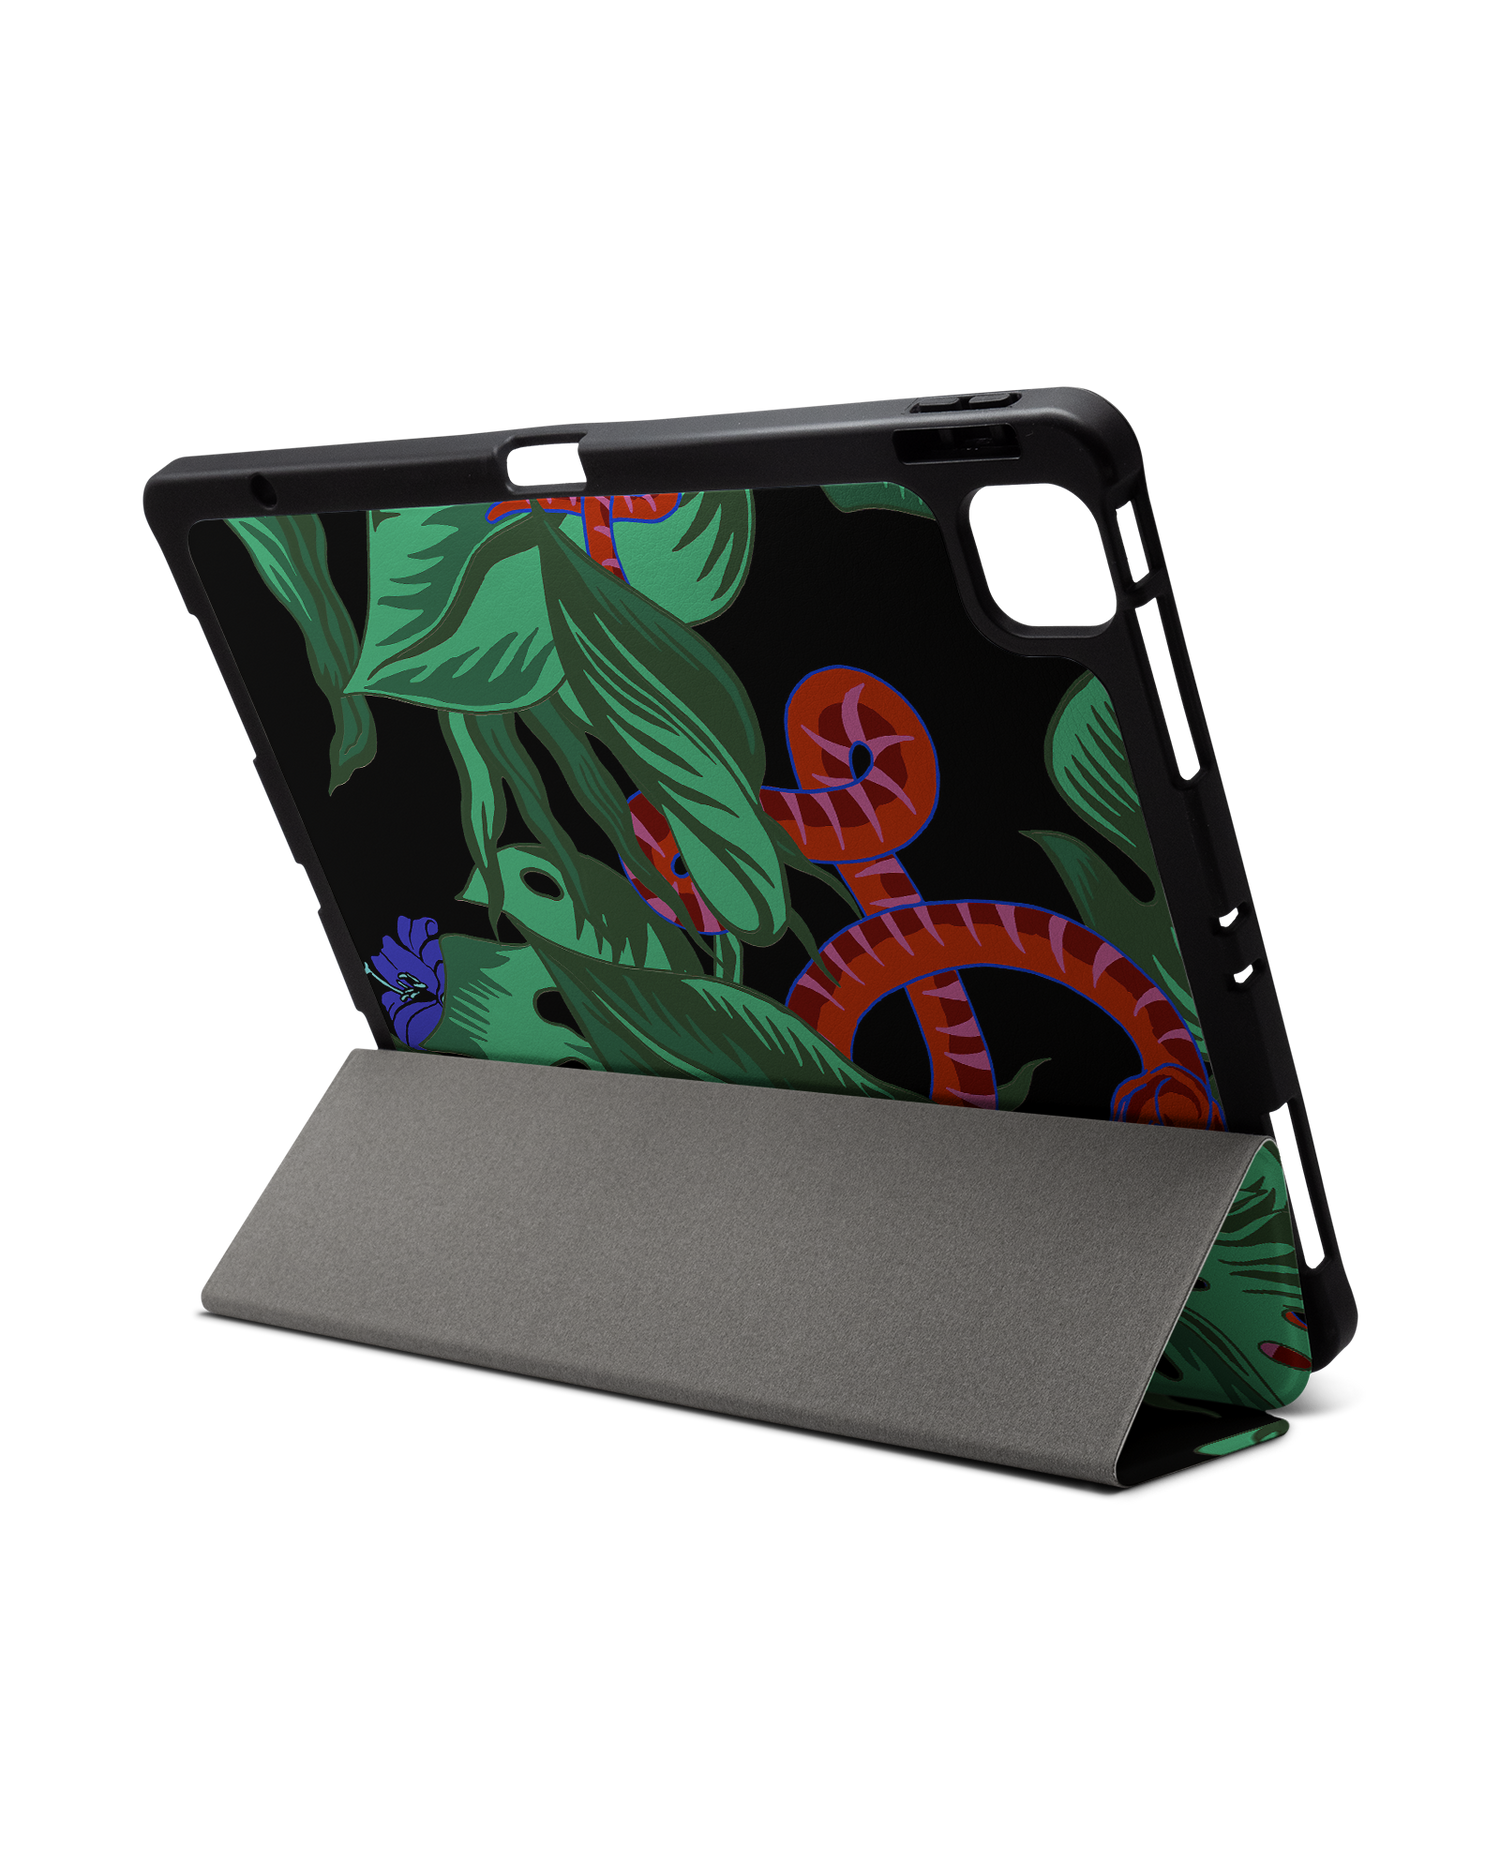 Tropical Snakes iPad Case with Pencil Holder for Apple iPad Pro 6 12.9